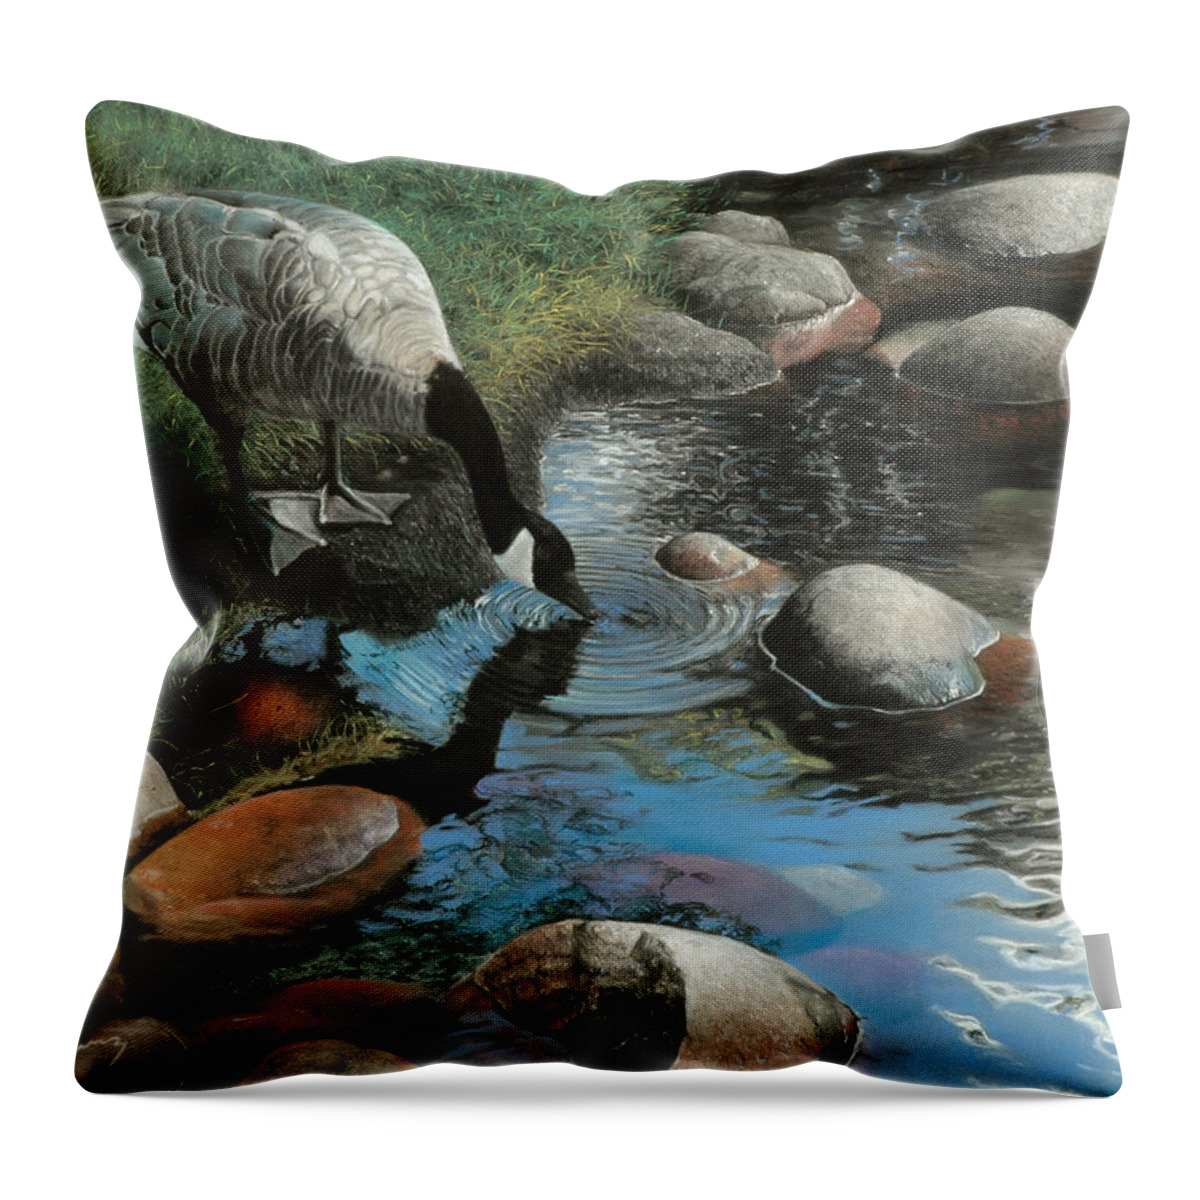 Canadian Geese Throw Pillow featuring the painting Abundance by David Vincenzi